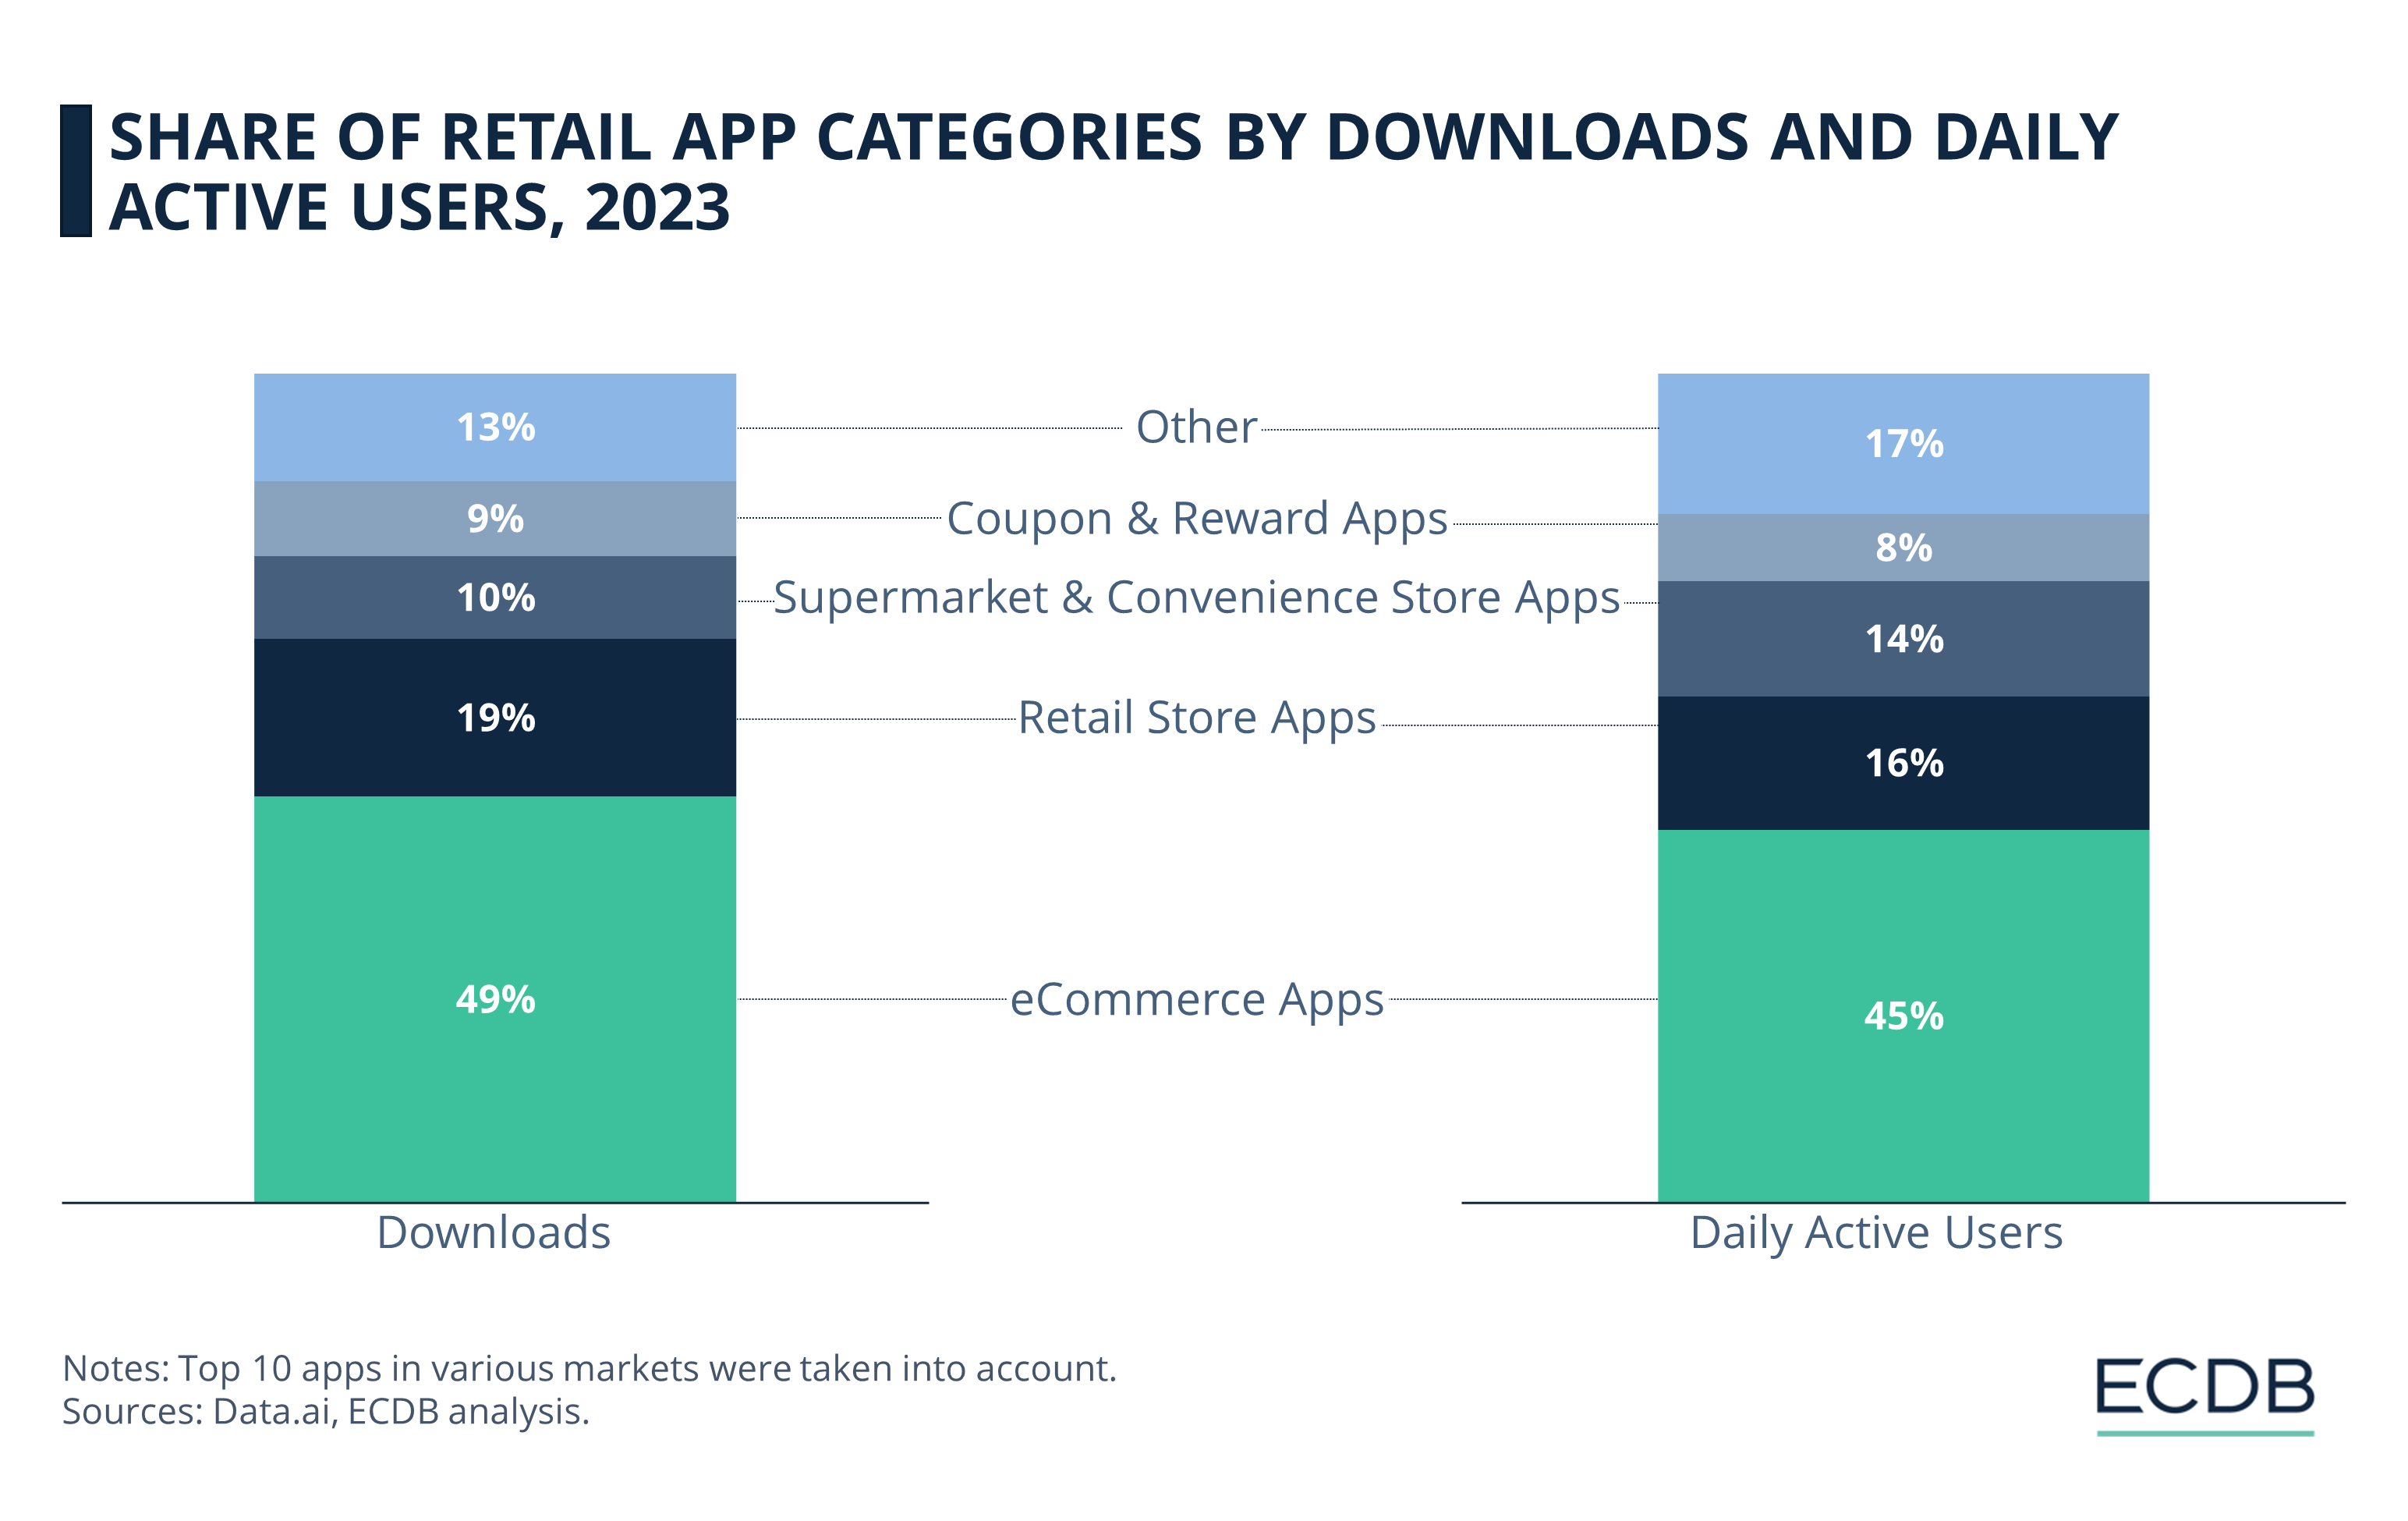 Share of Retail App Categories by Downloads and Daily Active Users, 2023